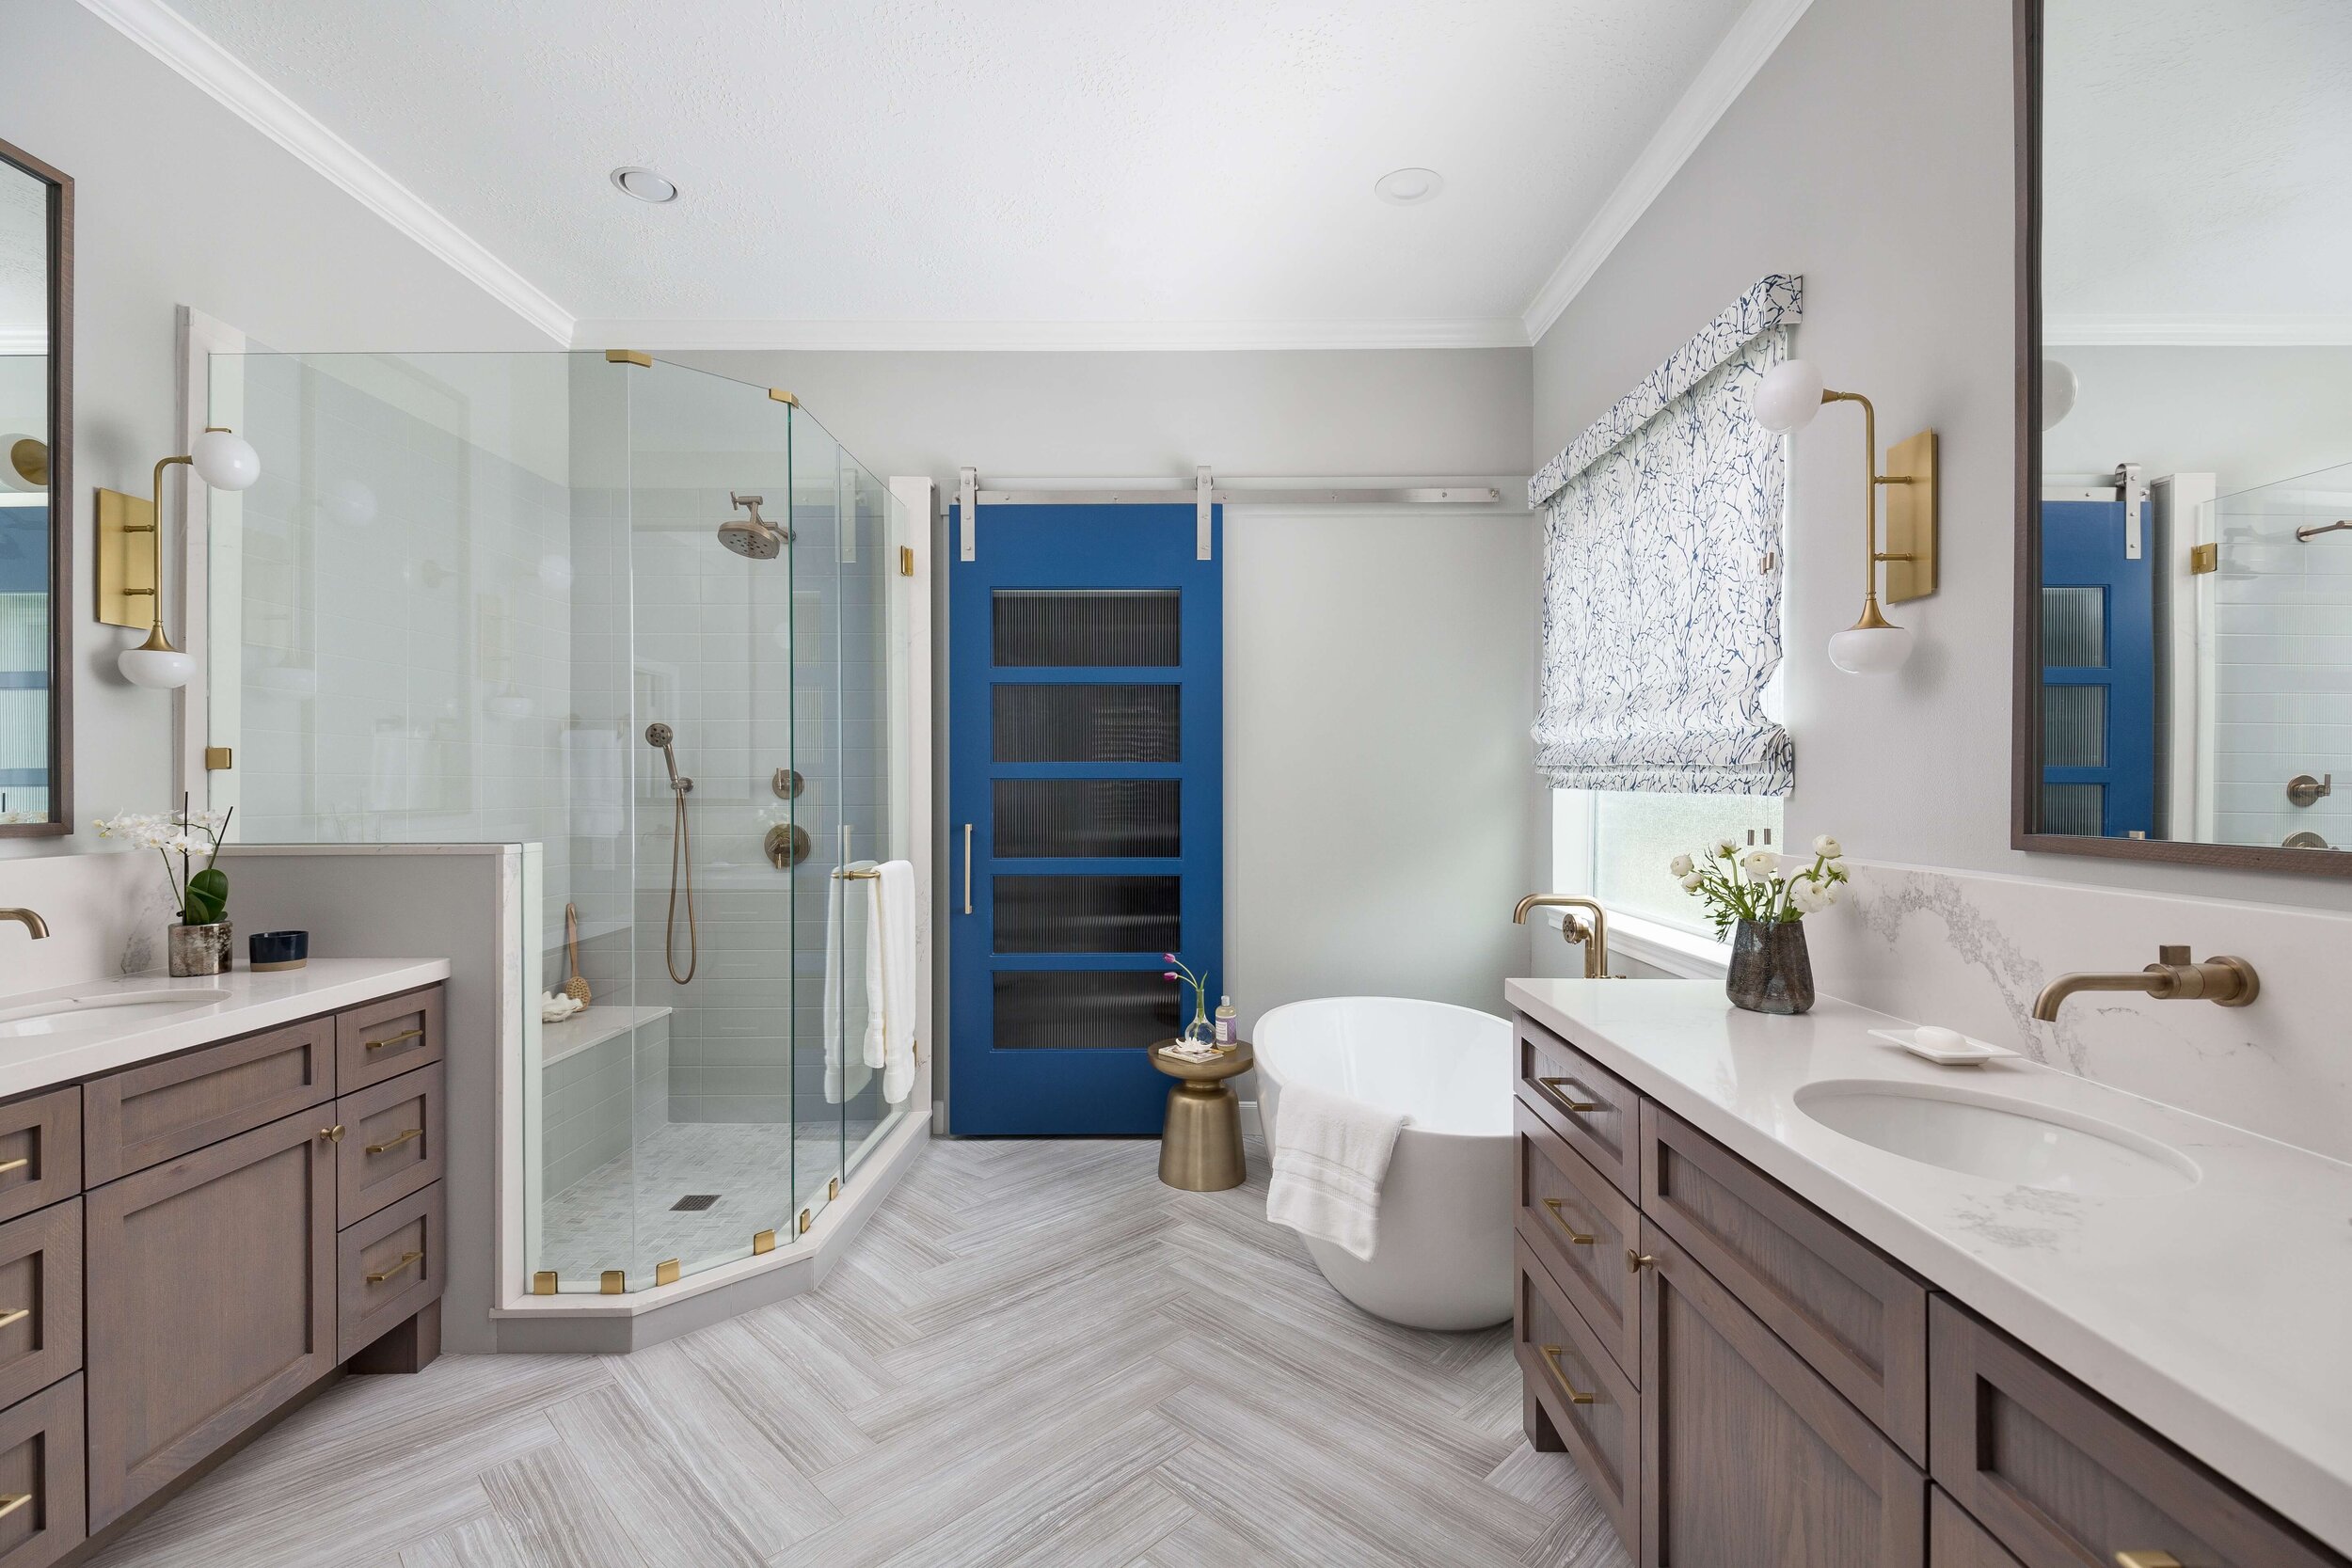 Remodeling a Master Bathroom? Consider These Layout